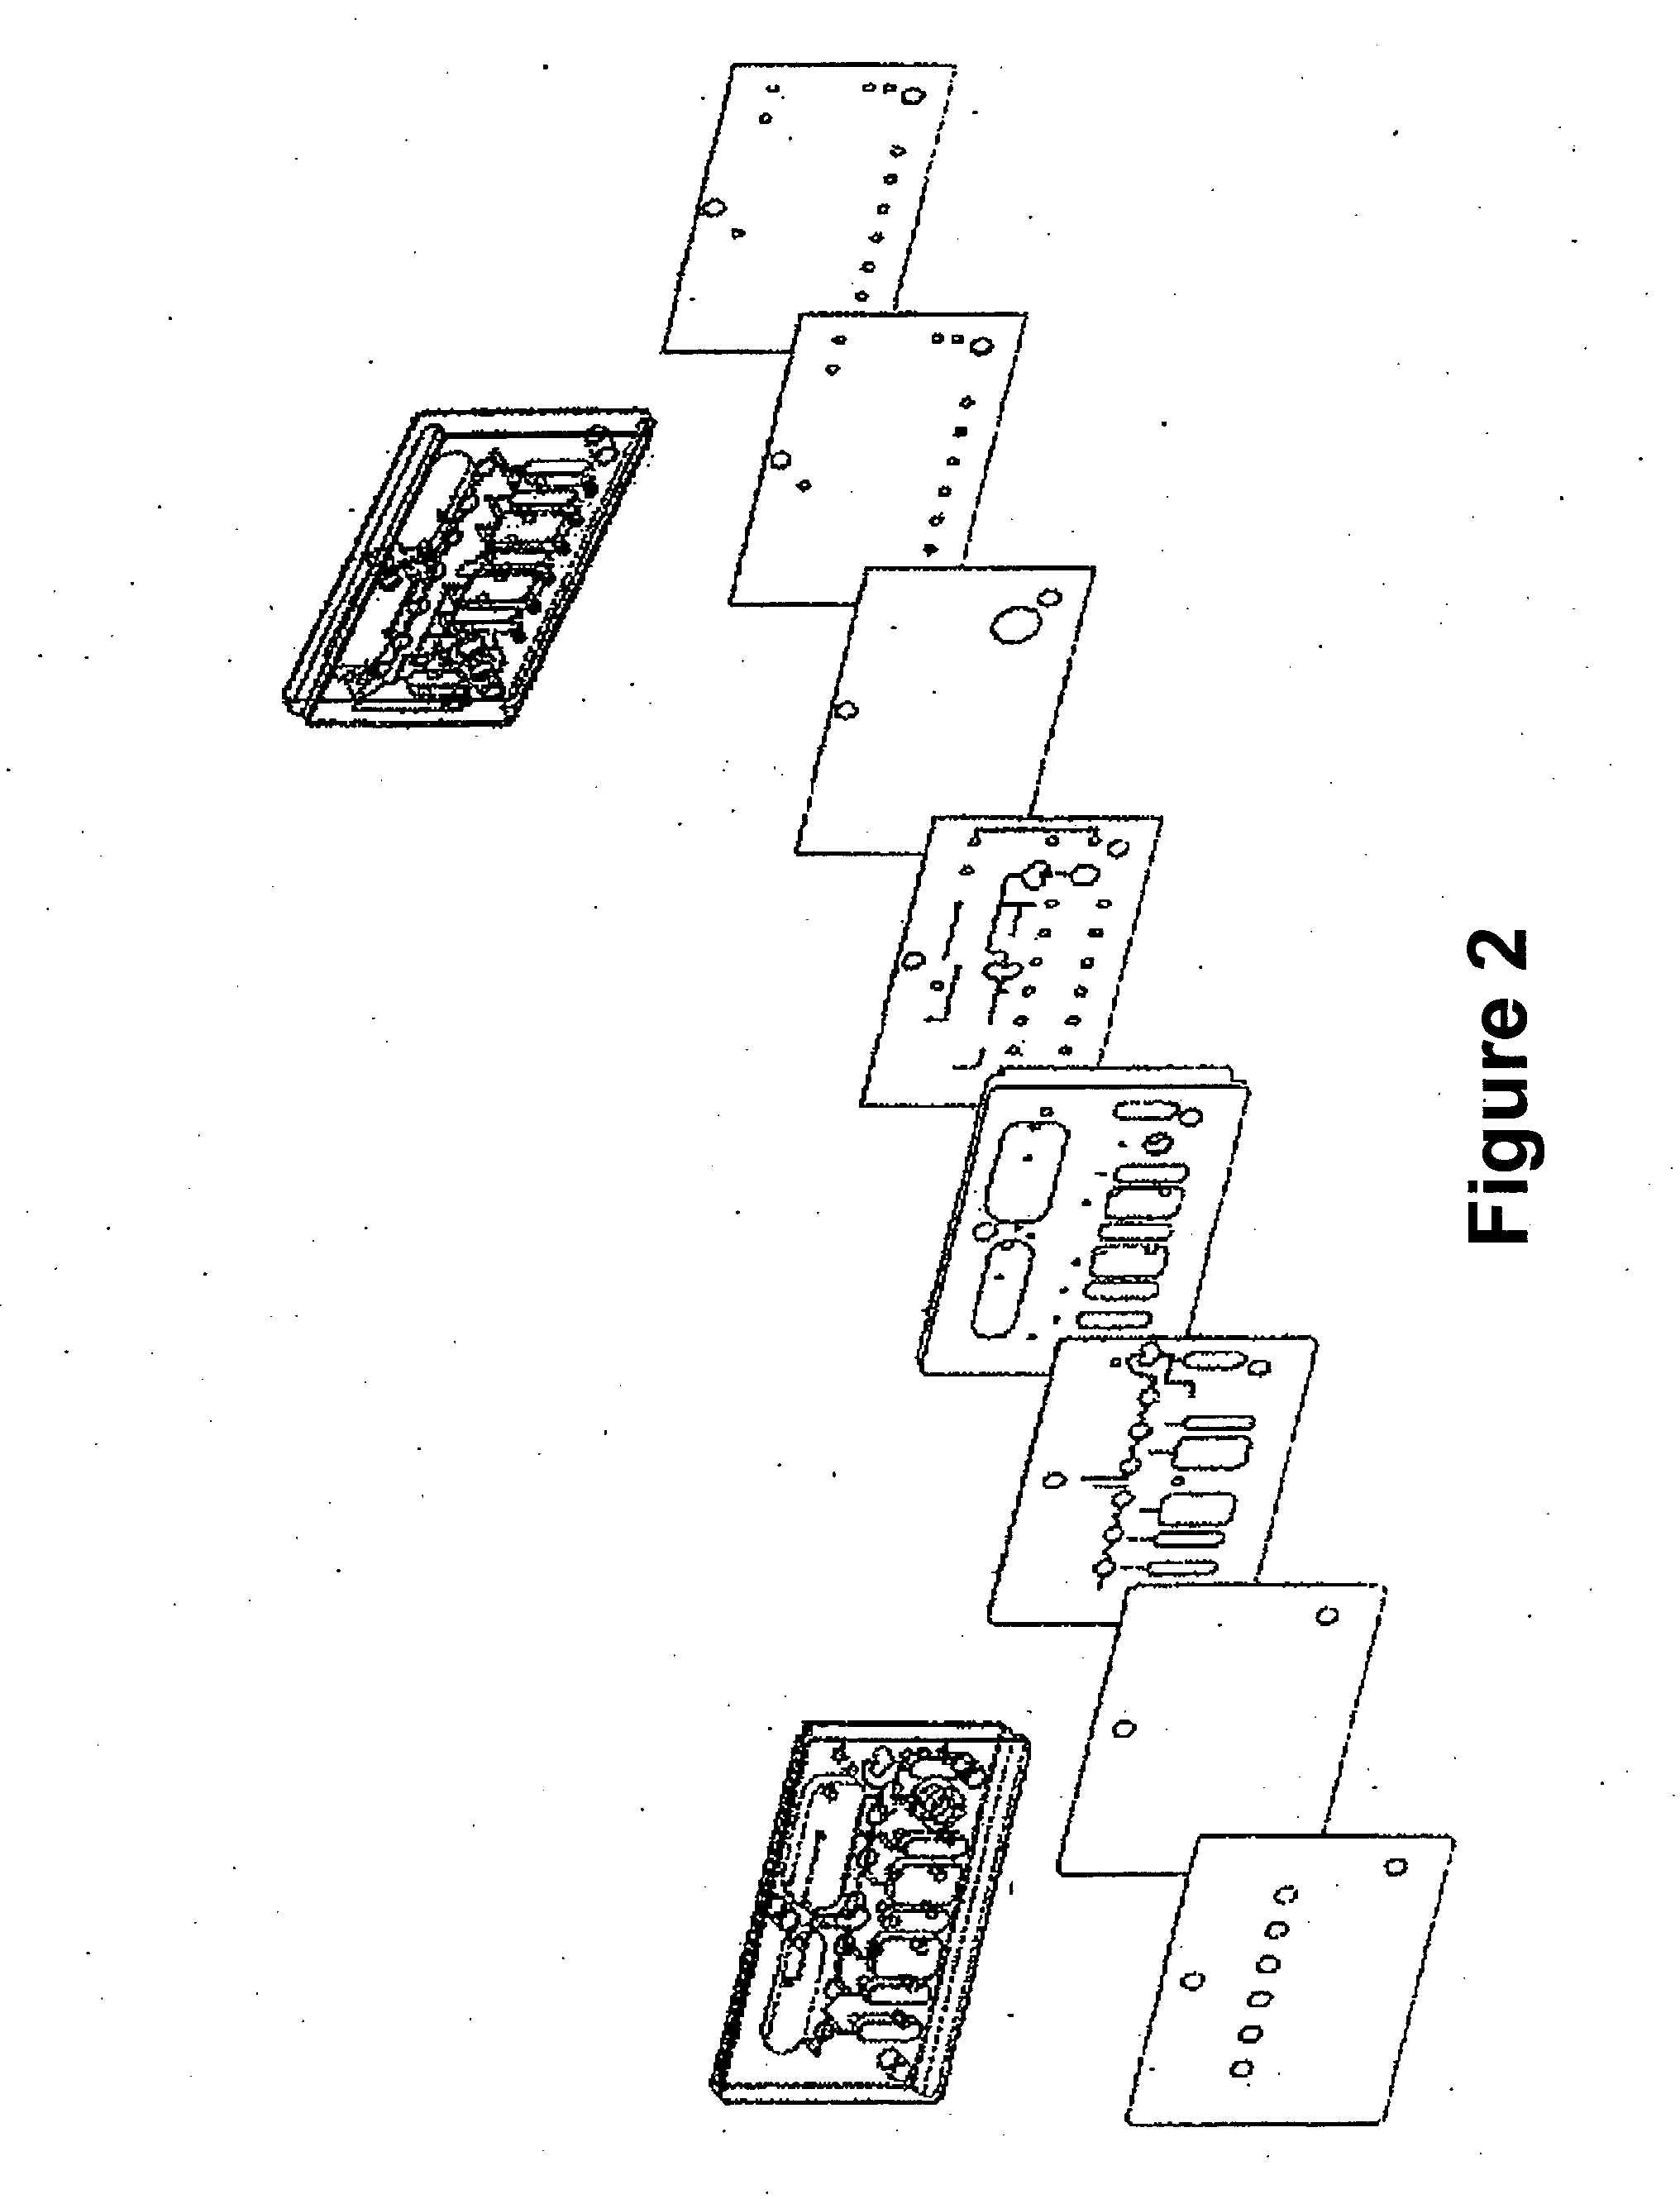 Systems and methods for monitoring pharmacological parameters